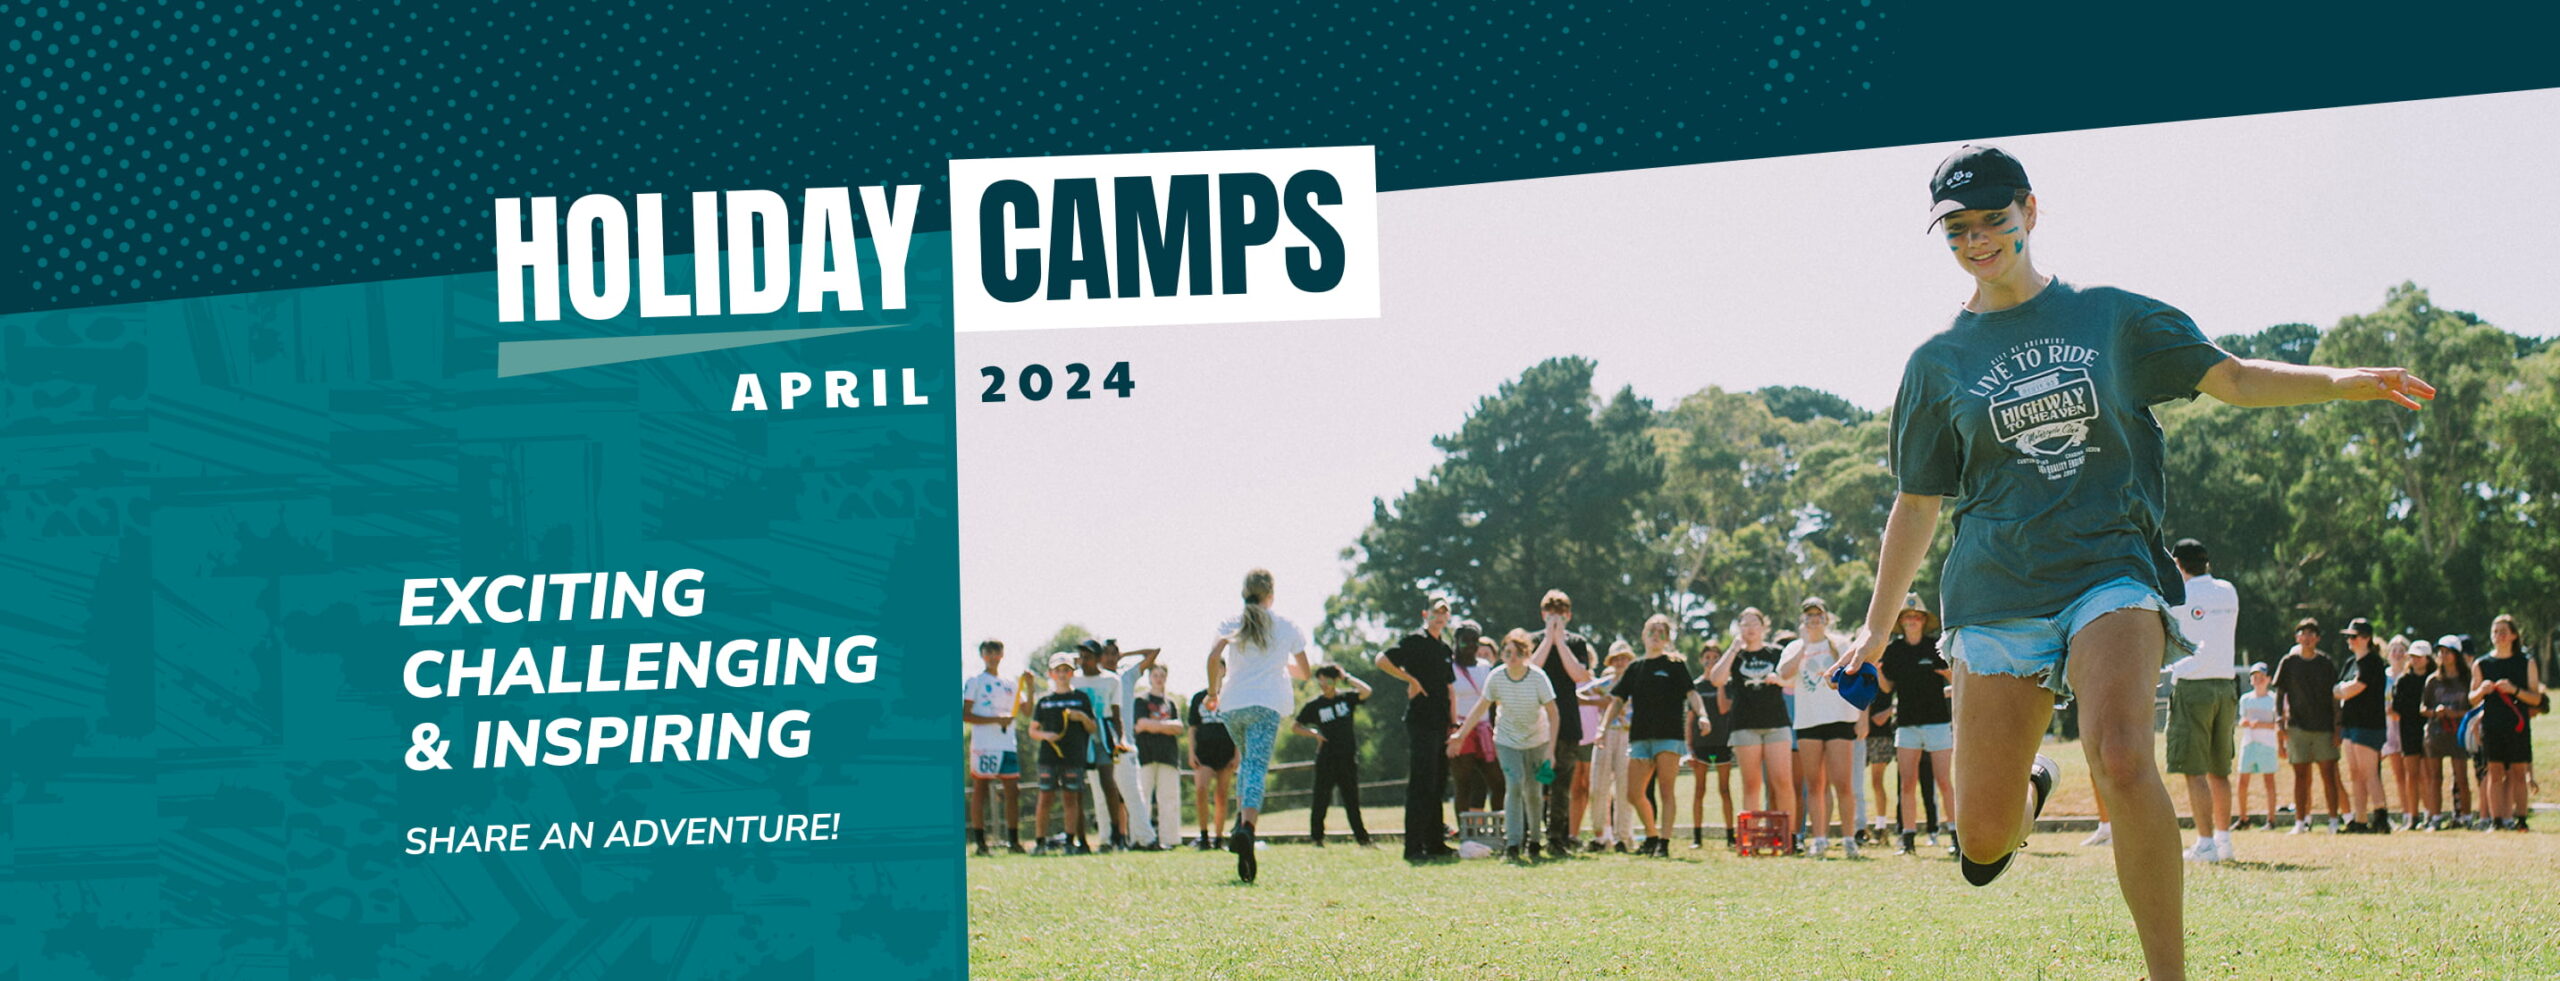 April Holiday camps web banner with holiday camps logo, April 2024 & the text EXCITING, CHALLENING, INSPIRING. Next to a girl with blue face paint playing field games at Holiday camps on the Mornington Peninsula